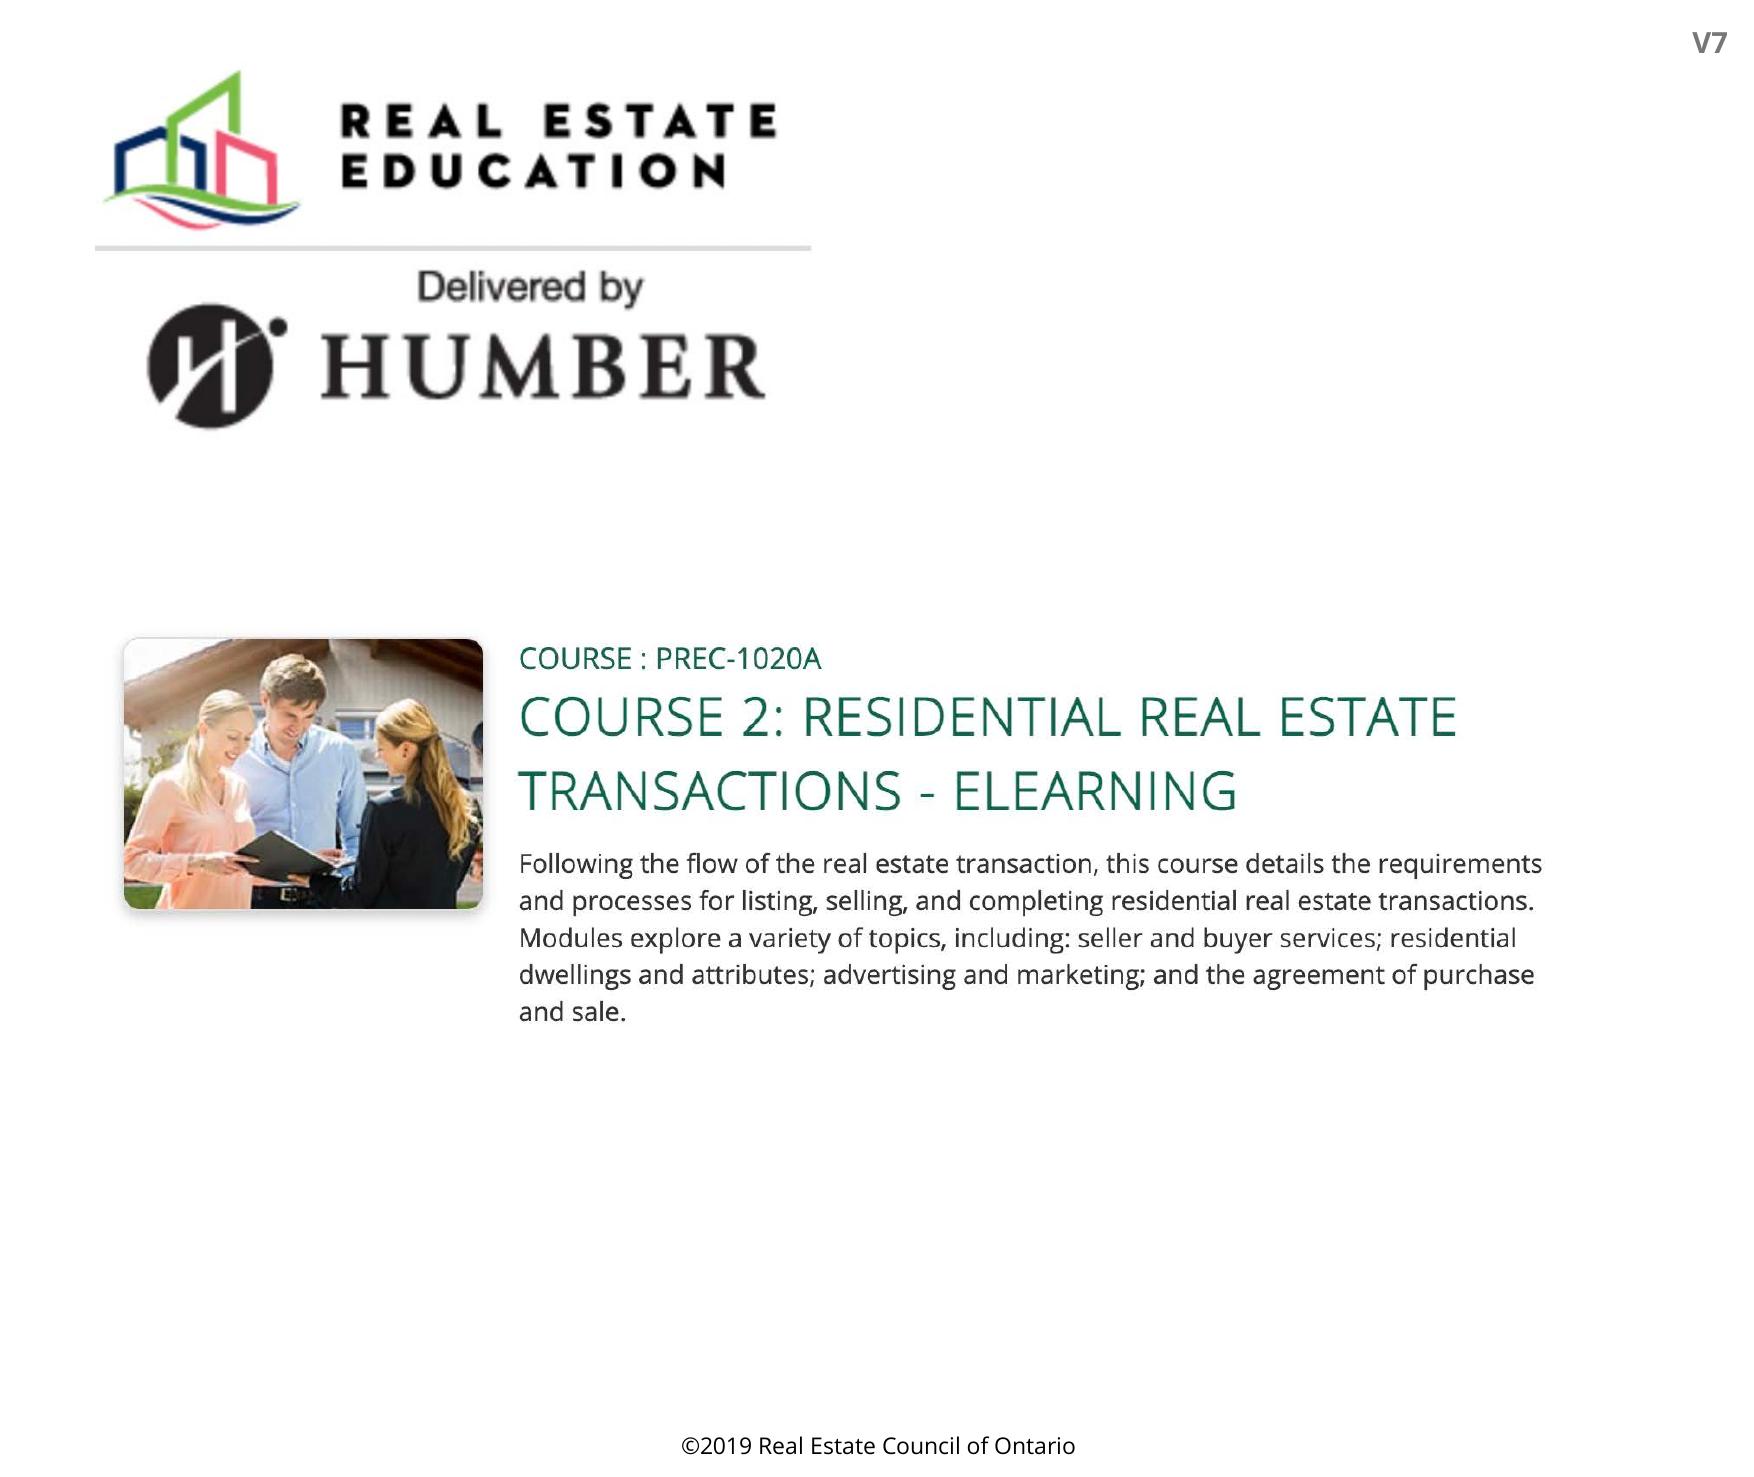 Course 2 - Residential Real Estate Transactions - Humber Real Estate Education by Real Estate Council of Ontario (RECO)